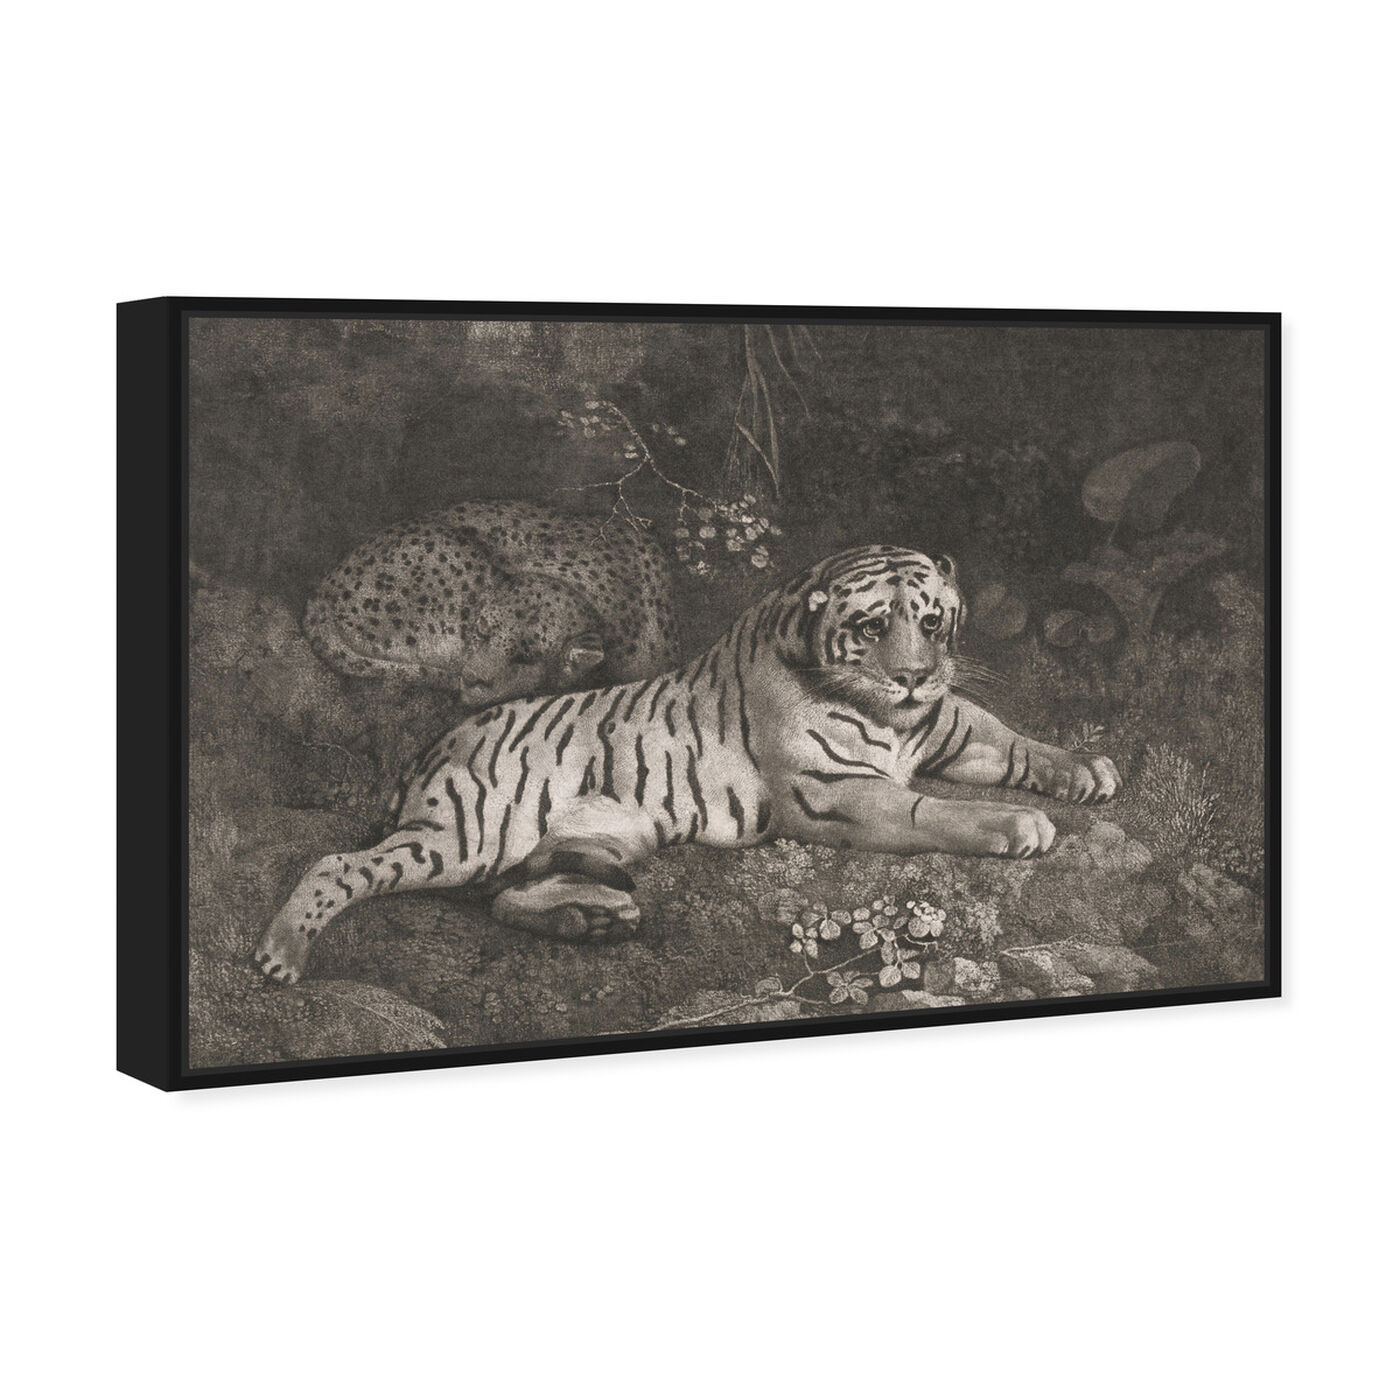 Angled view of G Stubbs - A Tiger Sleeping and a Leopard 1788 featuring animals and felines art.